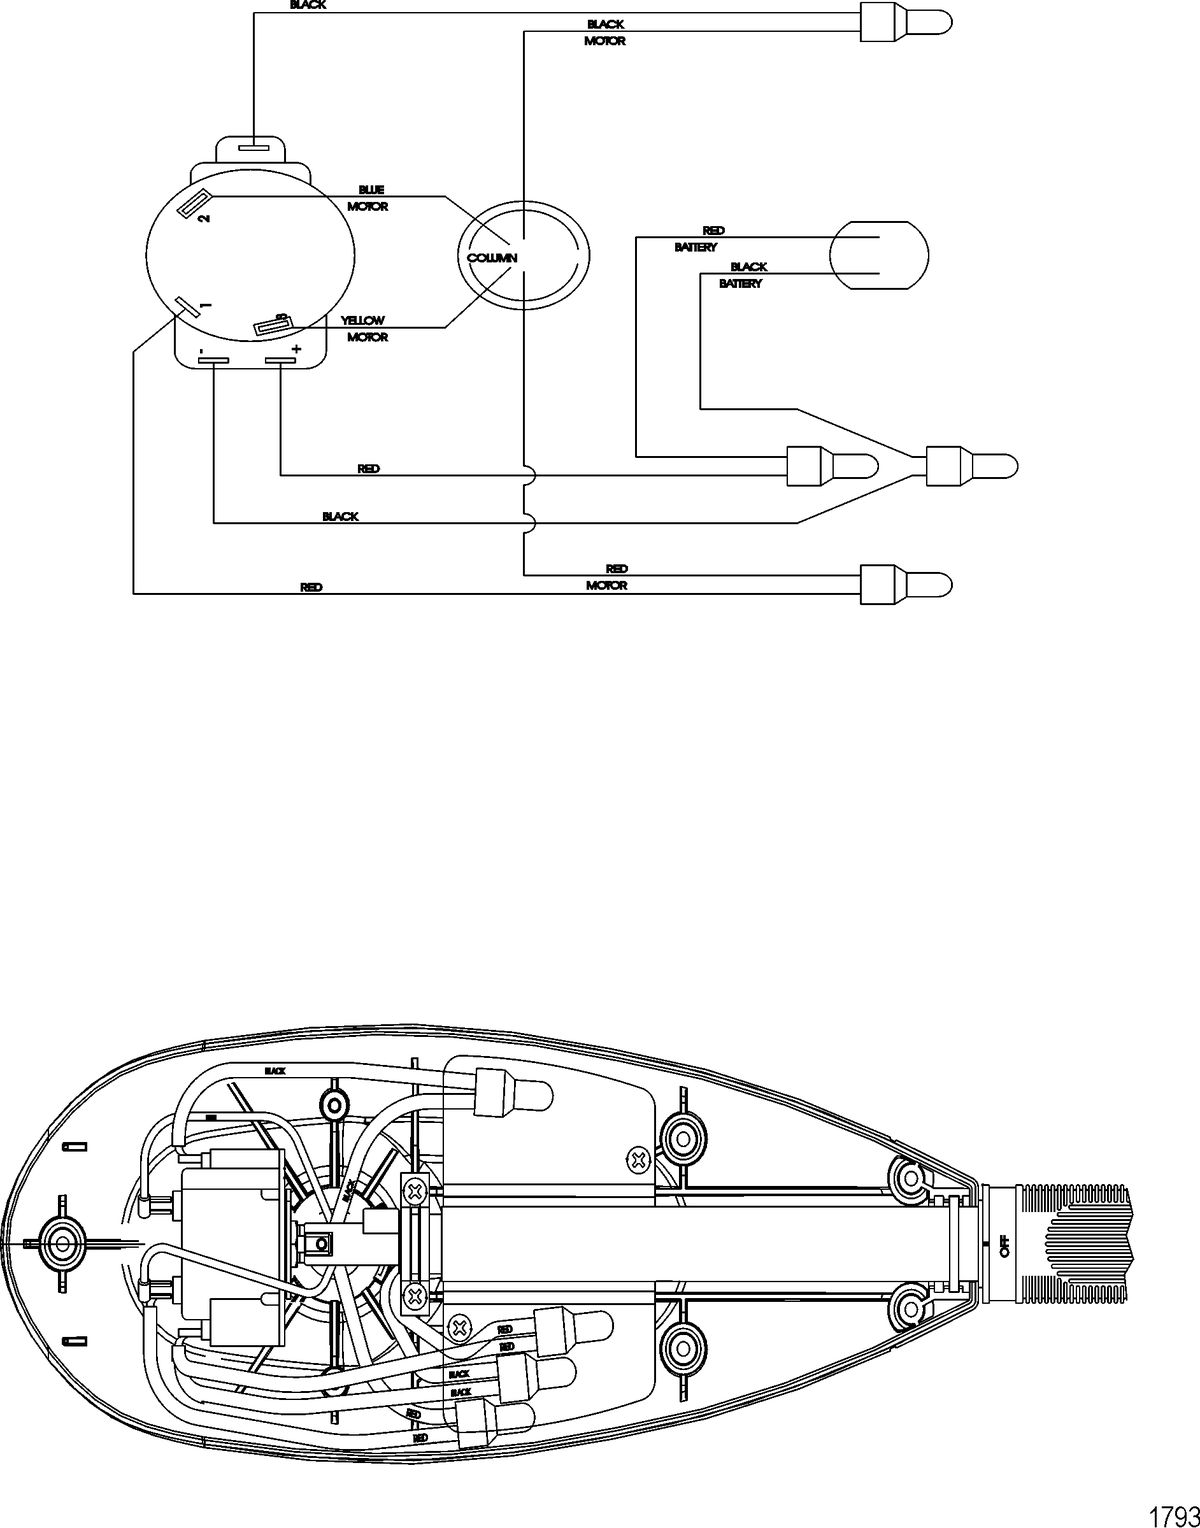 TROLLING MOTOR MOTORGUIDE FRESH WATER SERIES Wire Diagram(Model FW36HT) (Without Quick Connect)